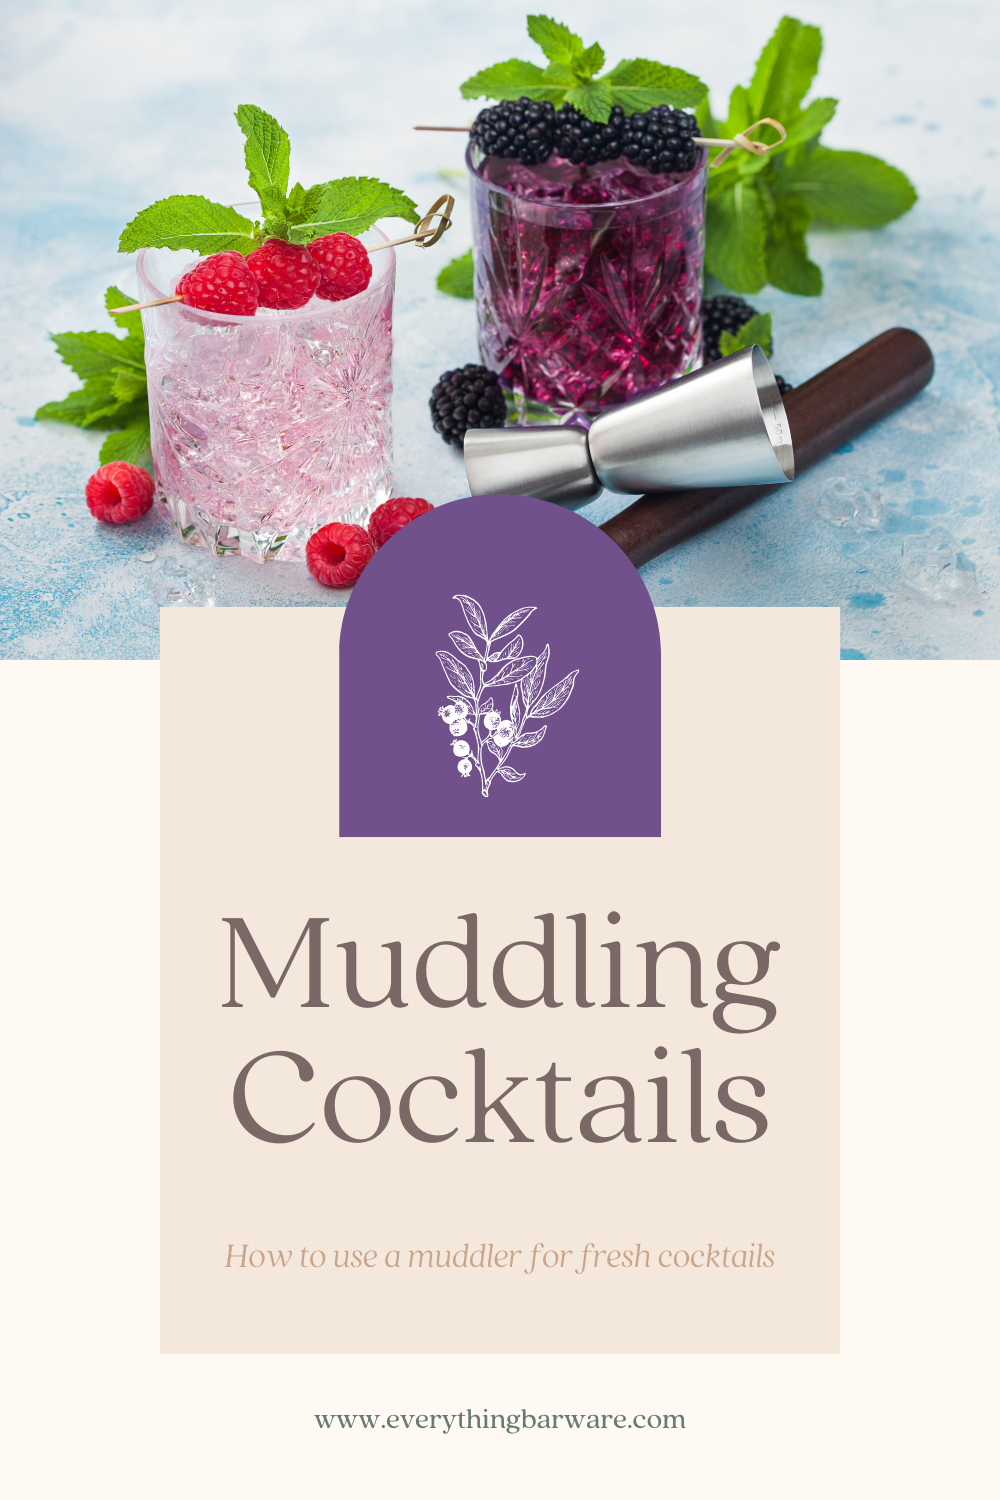 How and Why to Use a Muddler for Cocktails